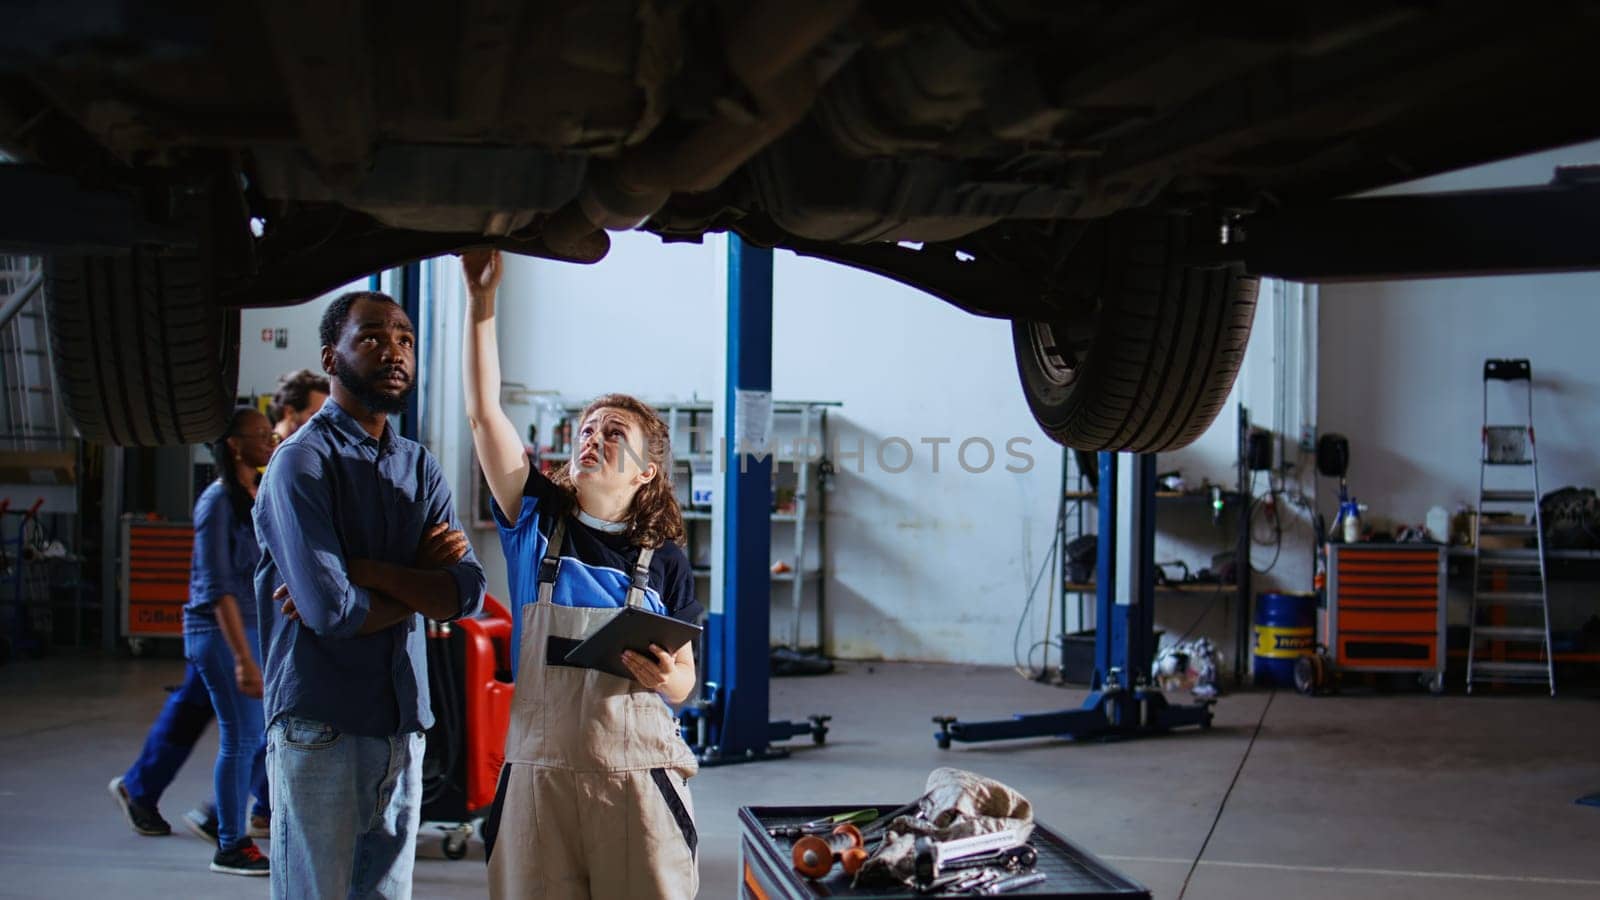 Licensed technician in repair shop showing customer what needs to be changed on his car. Garage worker inspecting vehicle placed on overhead lift, talking with BIPOC client